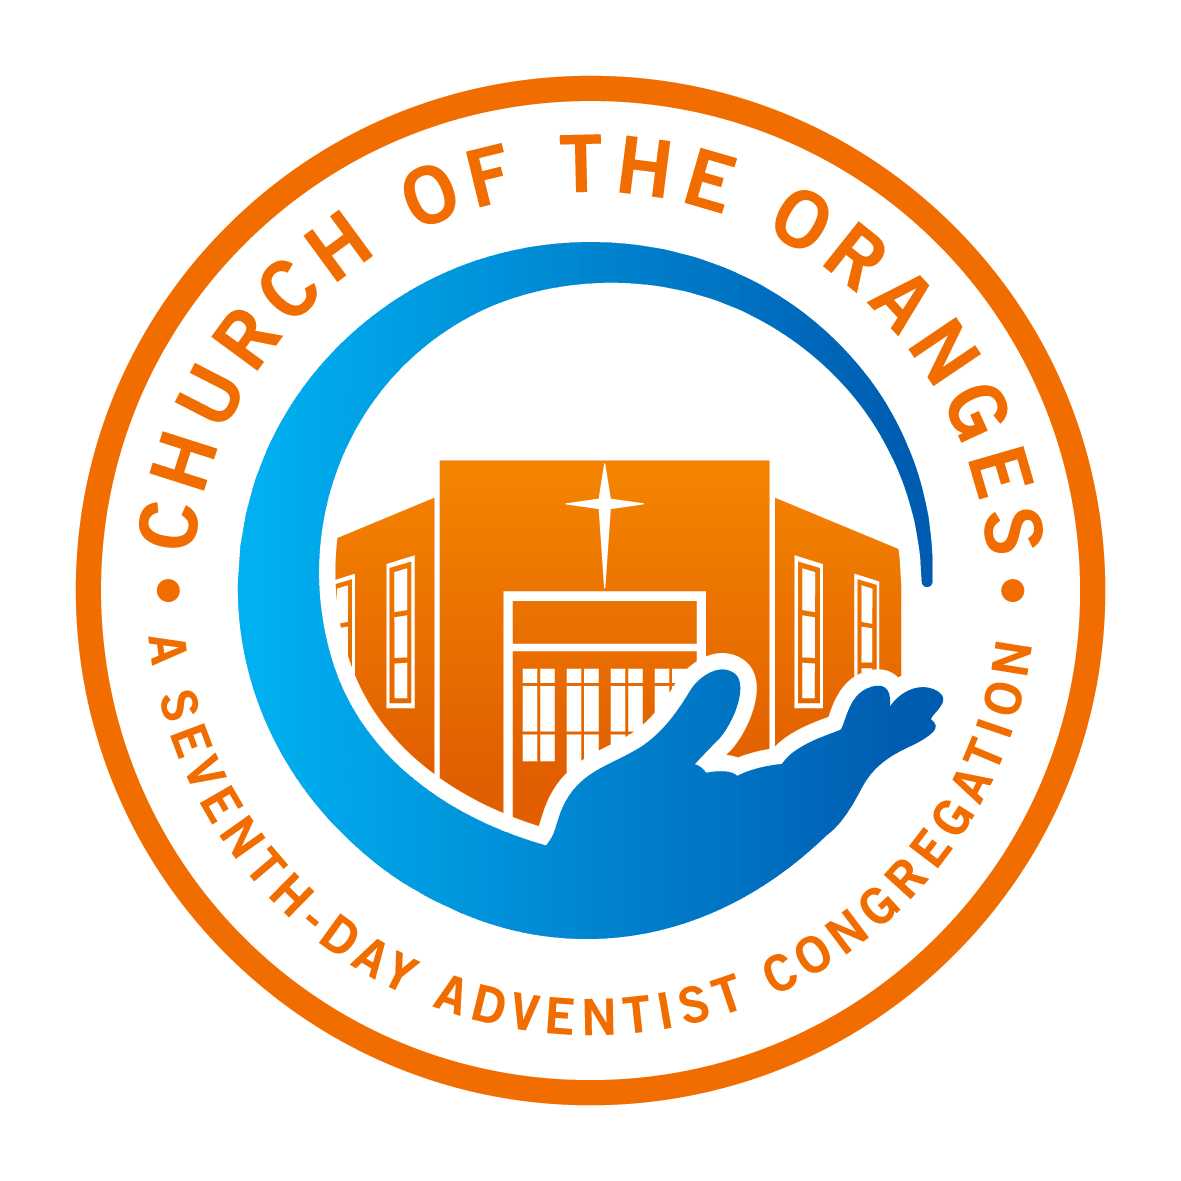 Seventh-Day Adventist Church of the Oranges